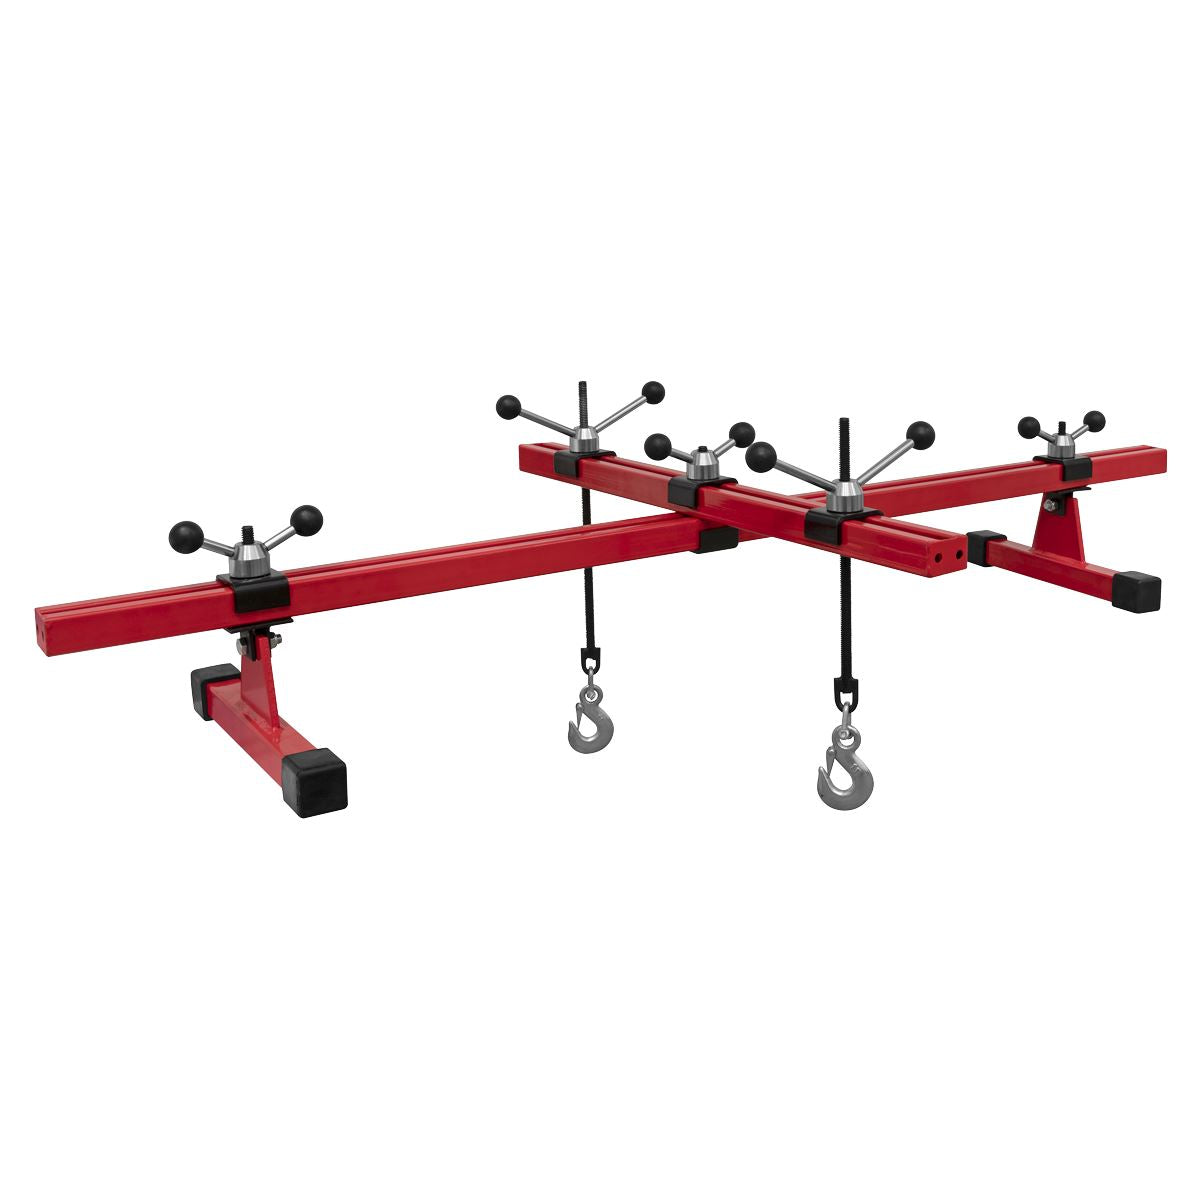 Sealey Engine Support Beam with Cross Beam 500kg Capacity